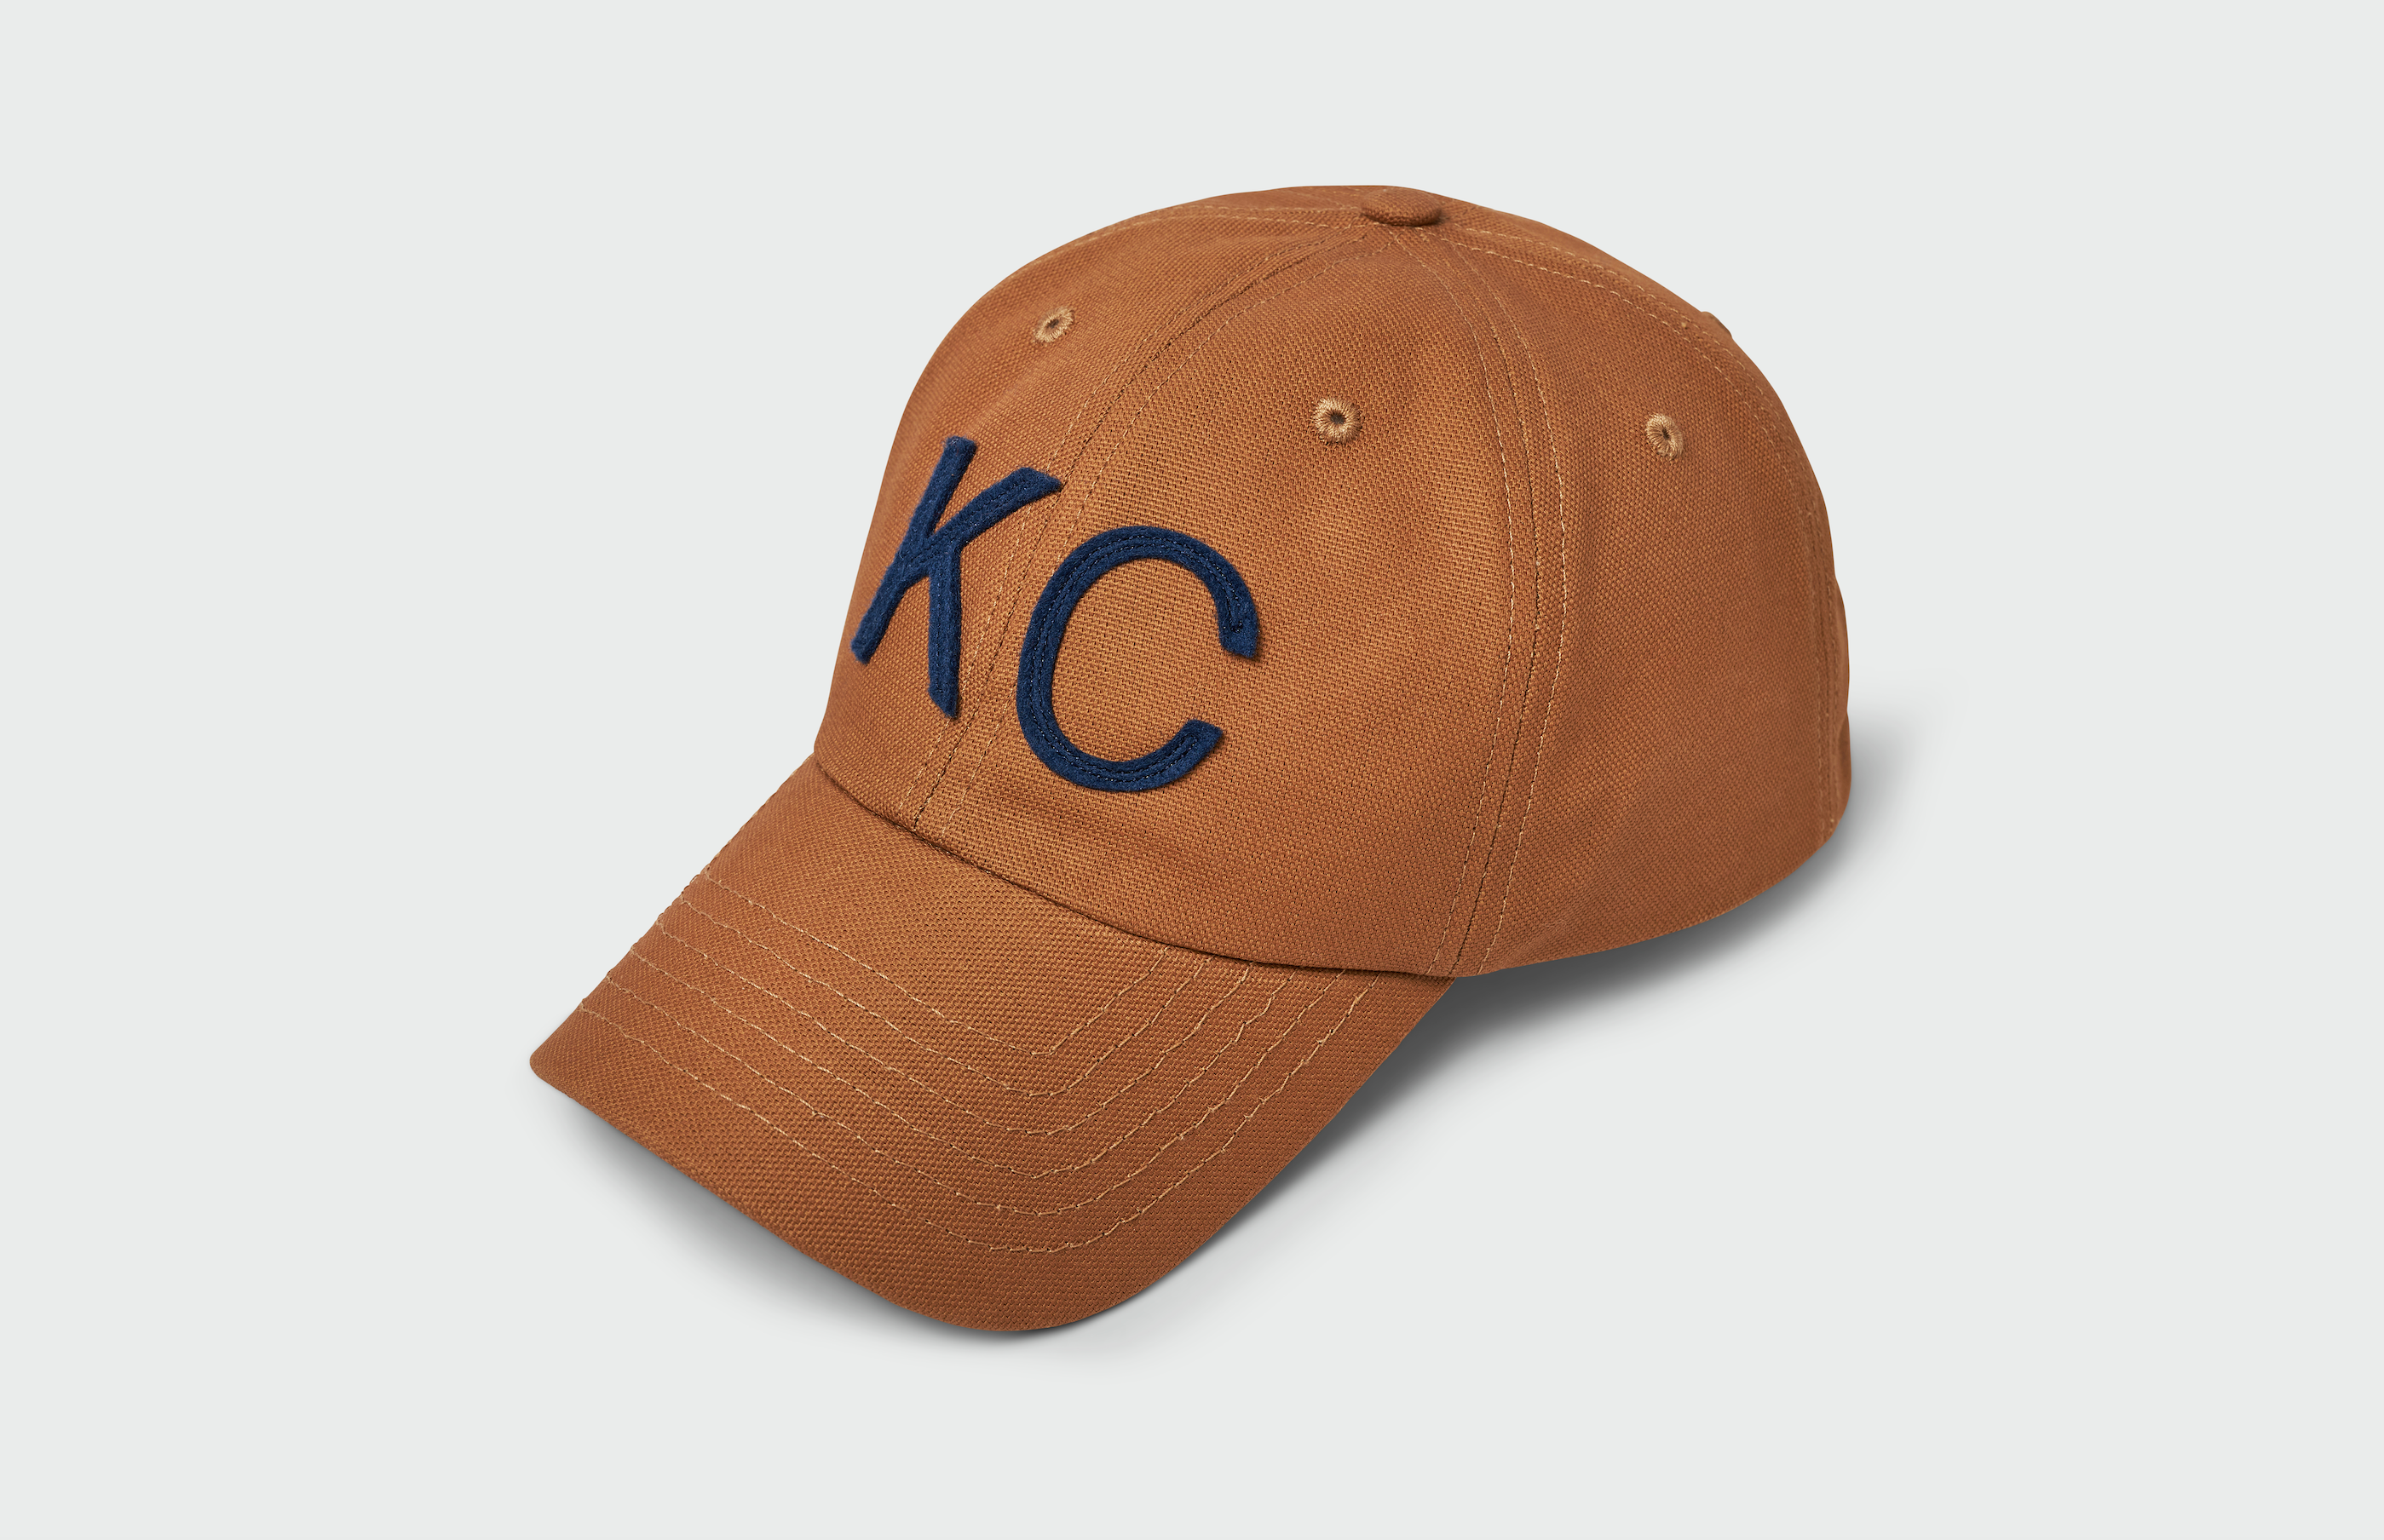 Midwest Trucker Hat | The Kansas City Clothing Co.